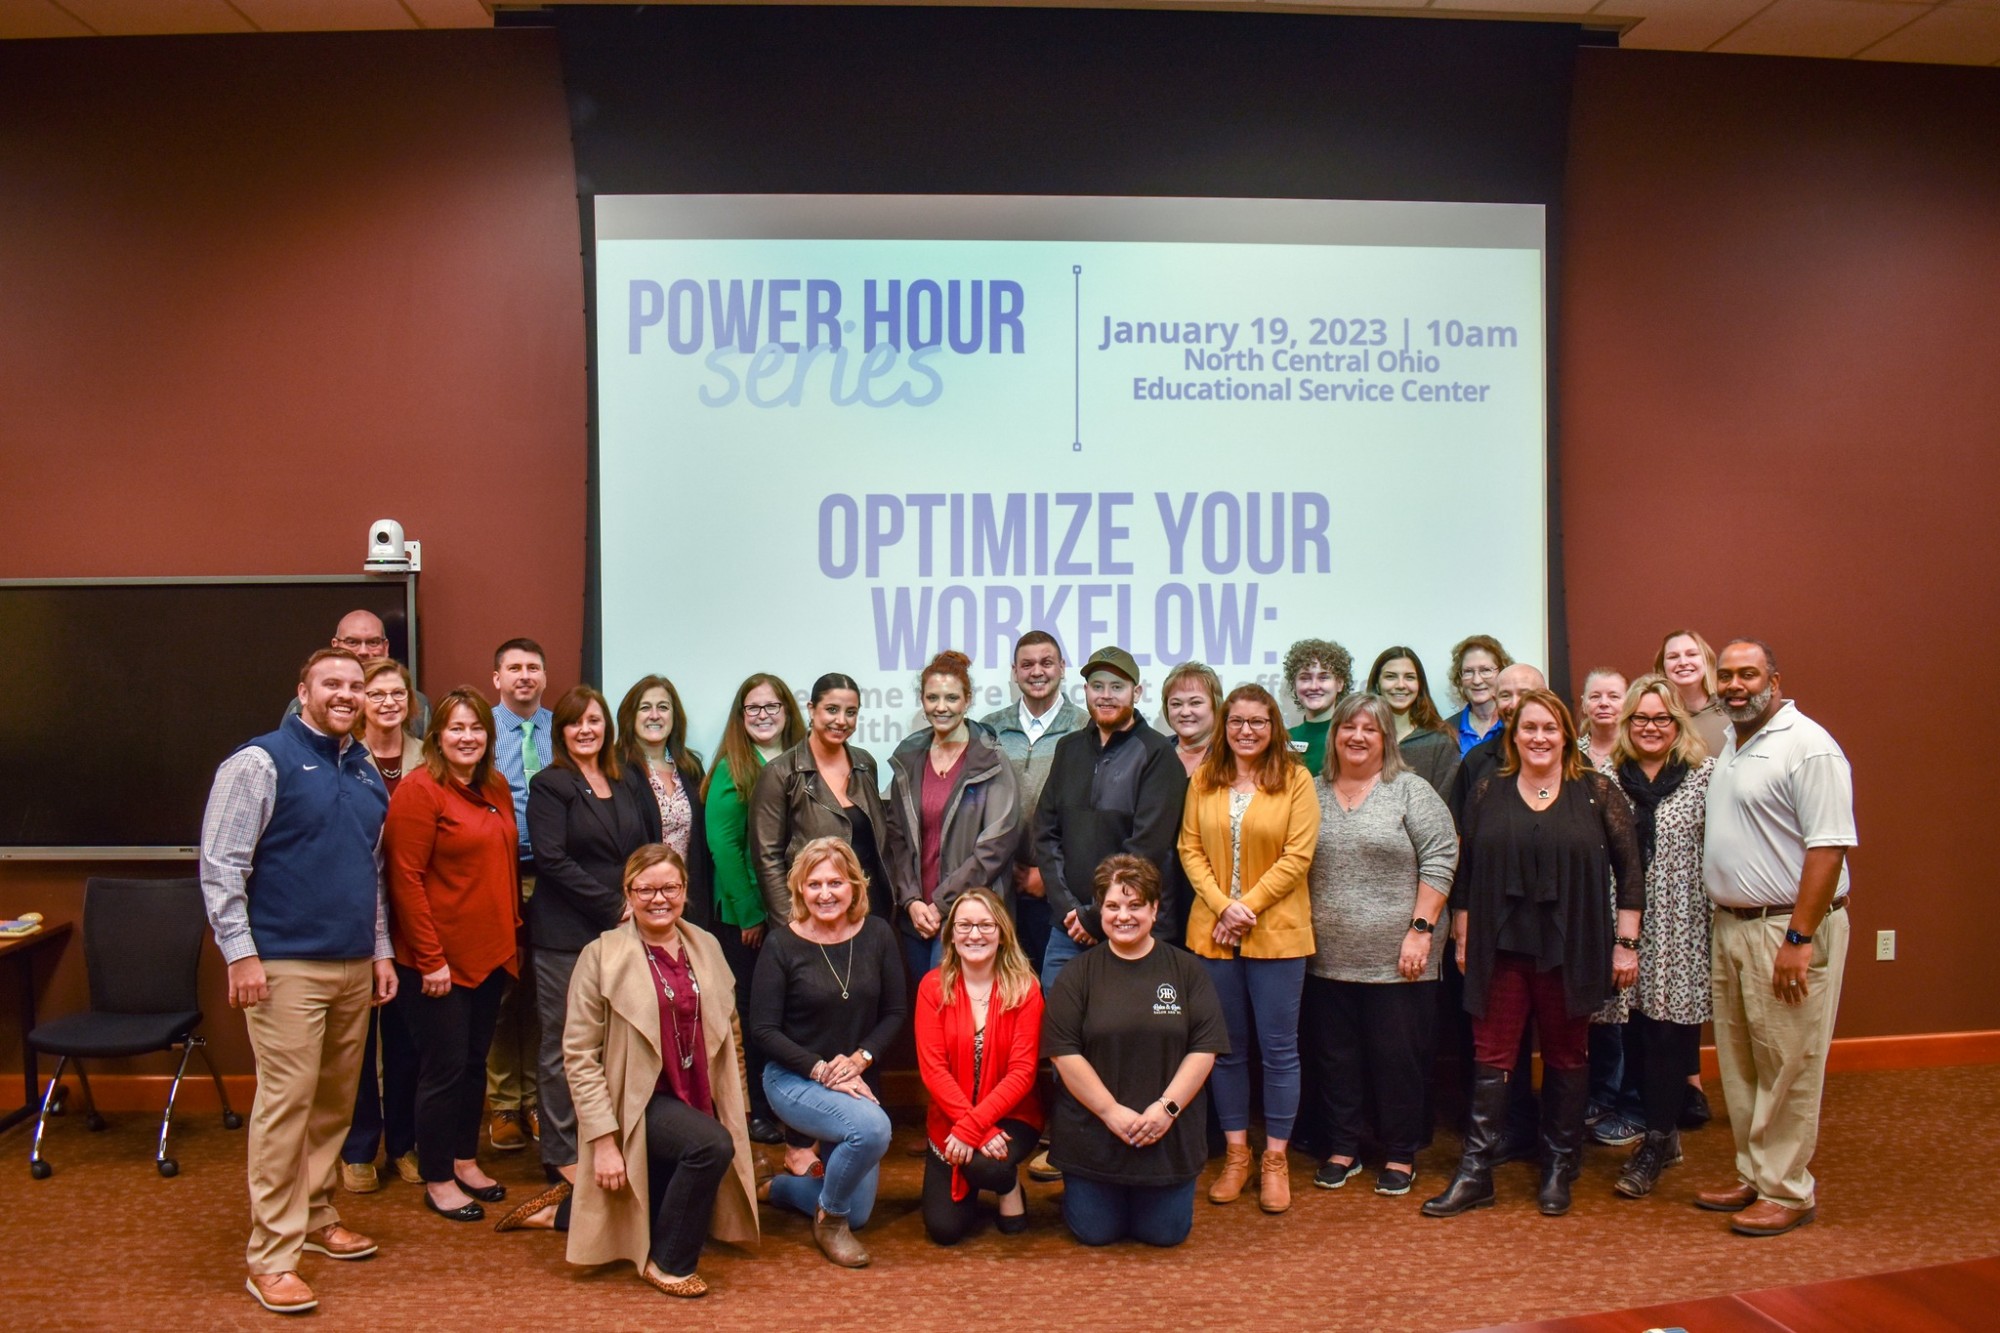 Power Hour Optimize Your Workflow